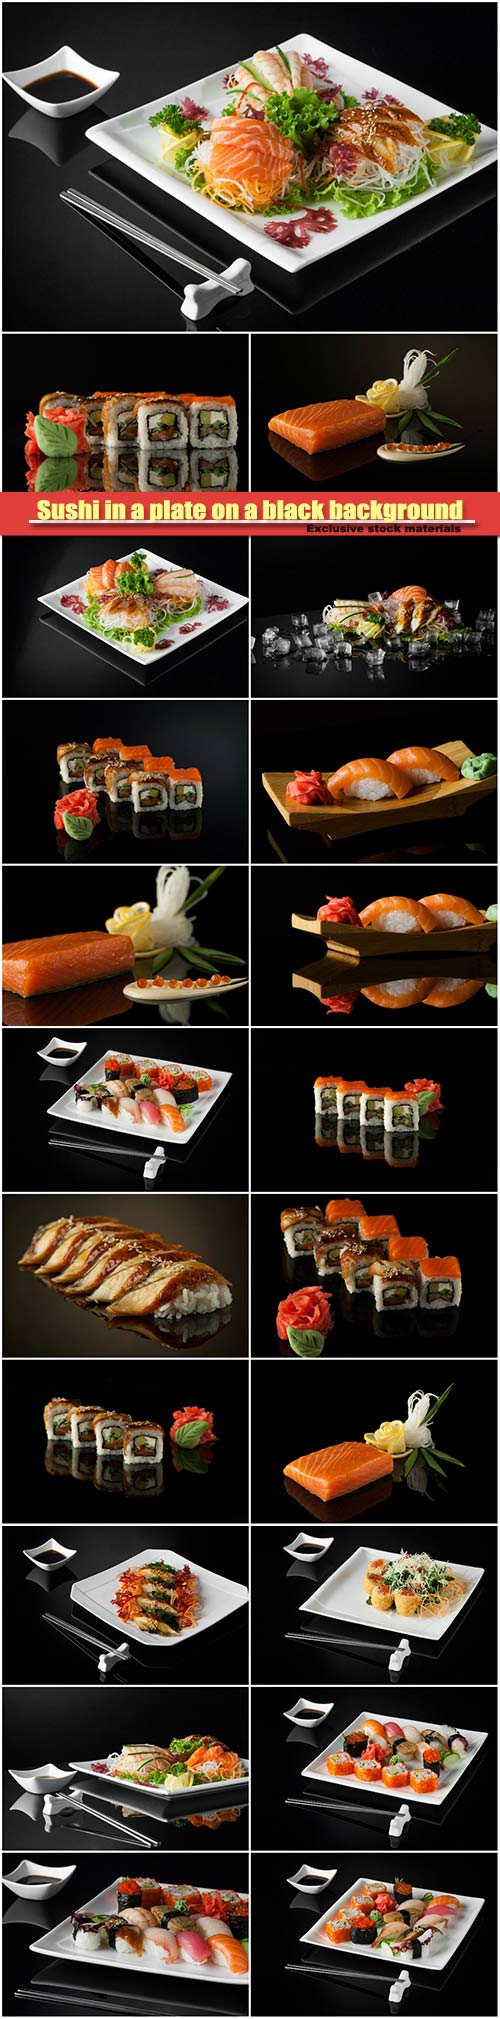 Sushi in a plate on a black background